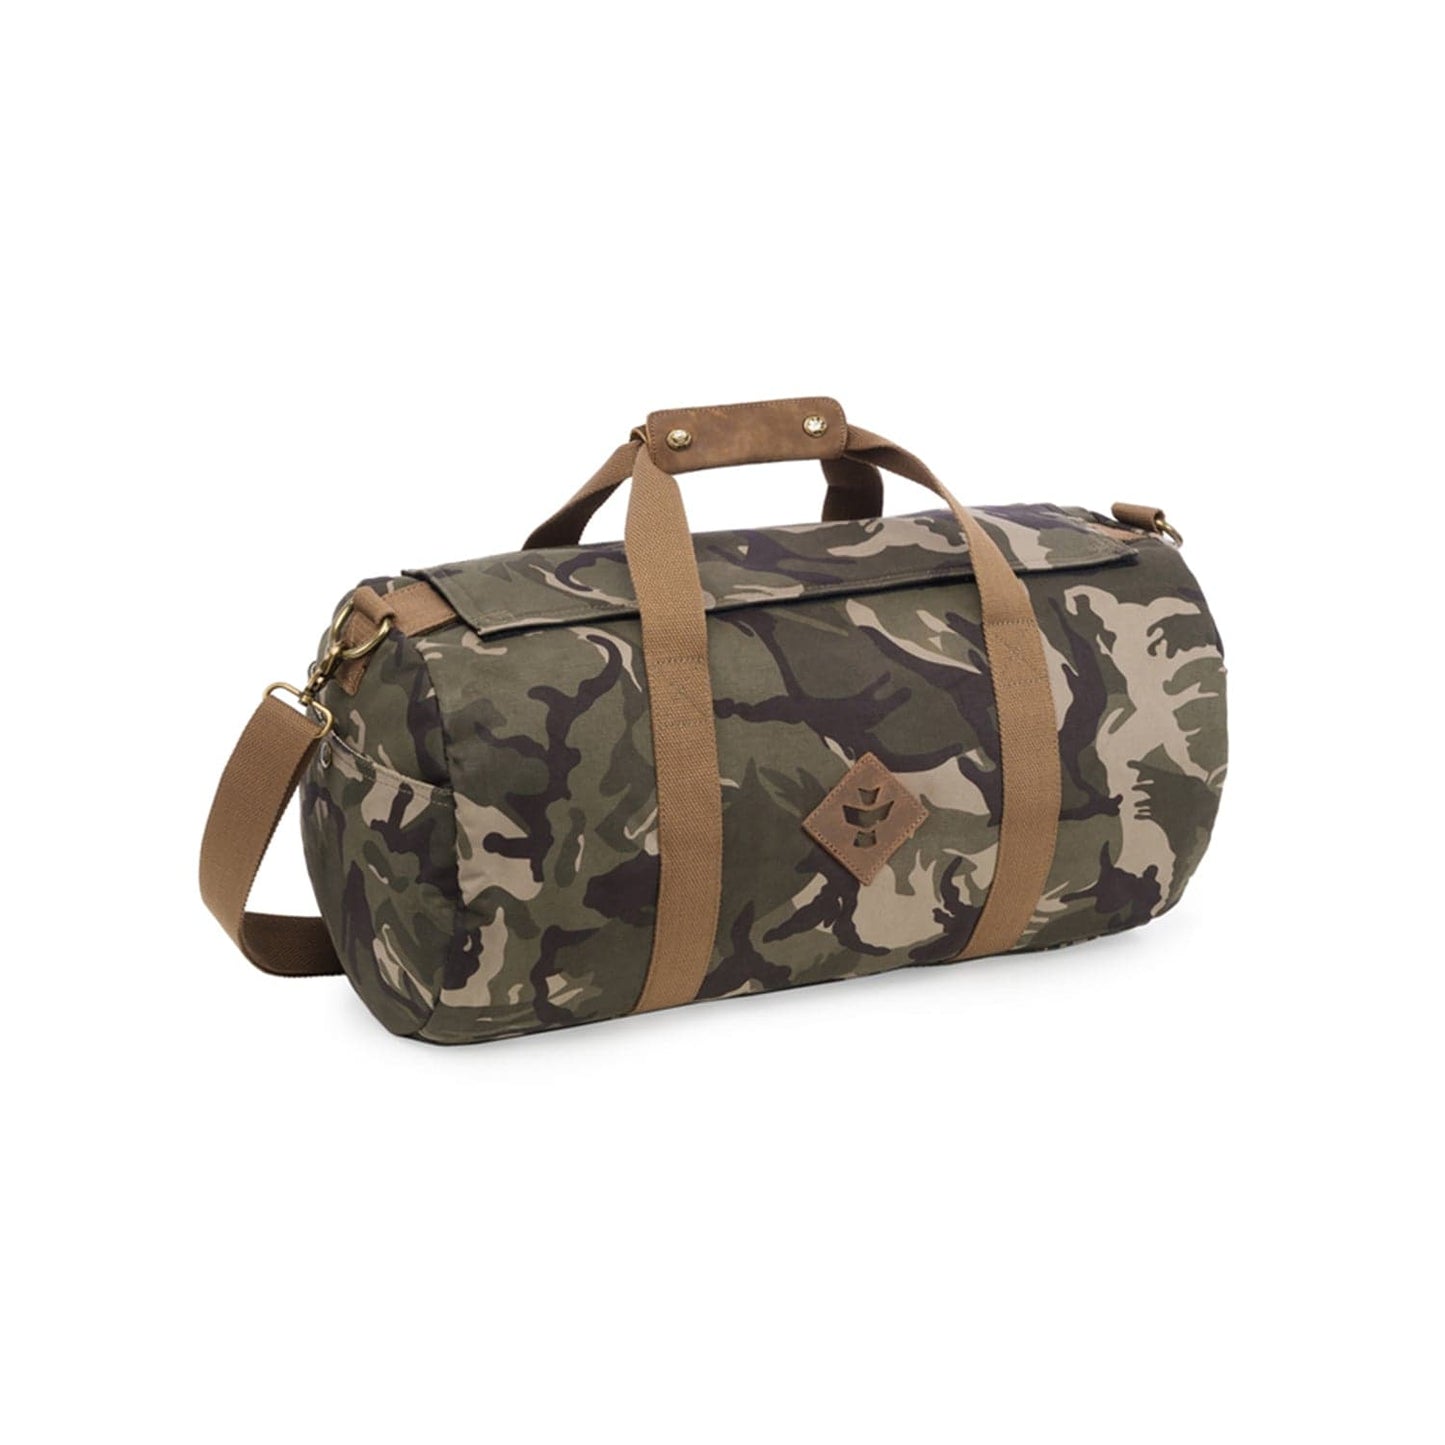 Revelry Supply Travel Bag Camo Brown The Overnighter - Smell Proof Small Duffle